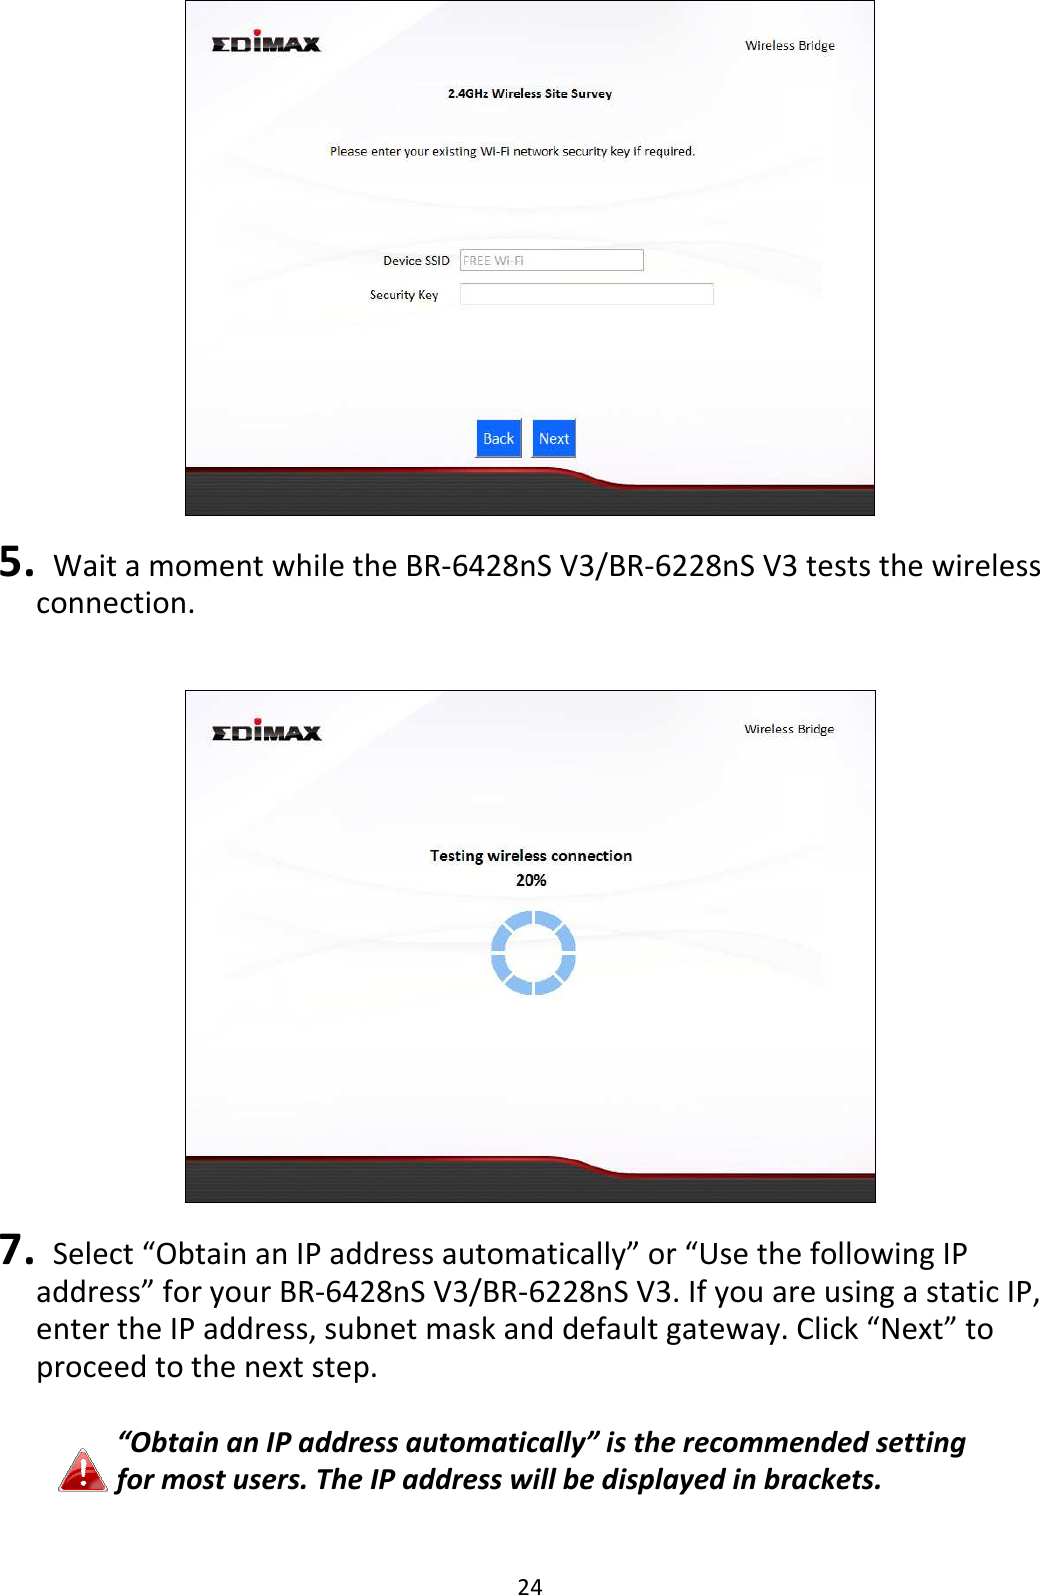 24   5.   Wait a moment while the BR-6428nS V3/BR-6228nS V3 tests the wireless connection.     7.   Select “Obtain an IP address automatically” or “Use the following IP address” for your BR-6428nS V3/BR-6228nS V3. If you are using a static IP, enter the IP address, subnet mask and default gateway. Click “Next” to proceed to the next step.  “Obtain an IP address automatically” is the recommended setting for most users. The IP address will be displayed in brackets.  